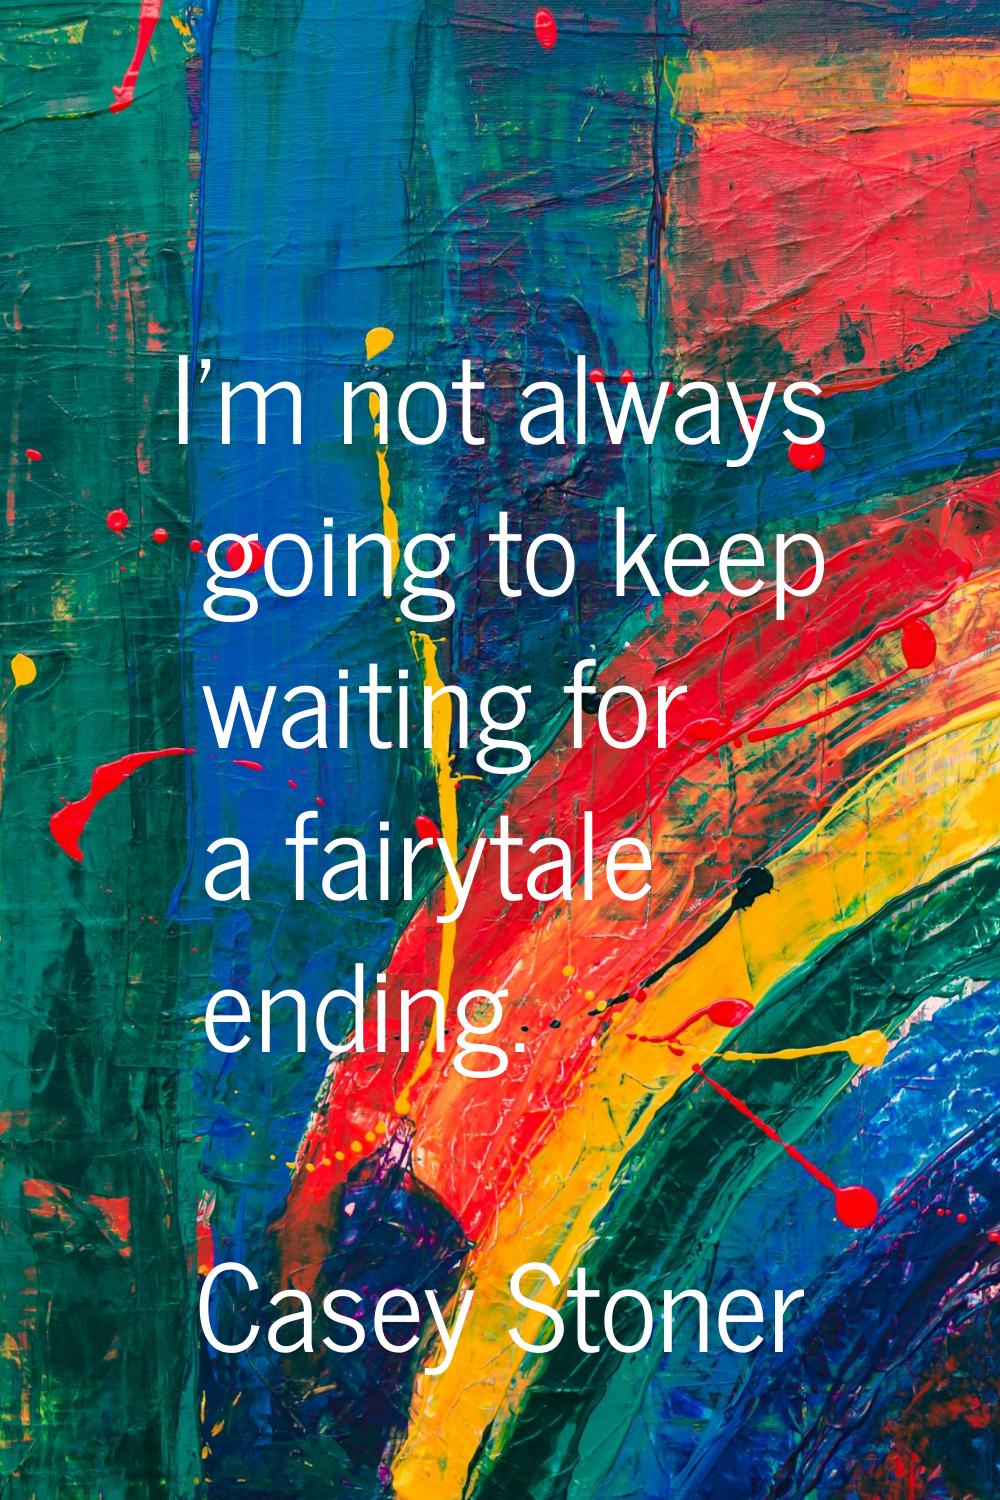 I'm not always going to keep waiting for a fairytale ending.